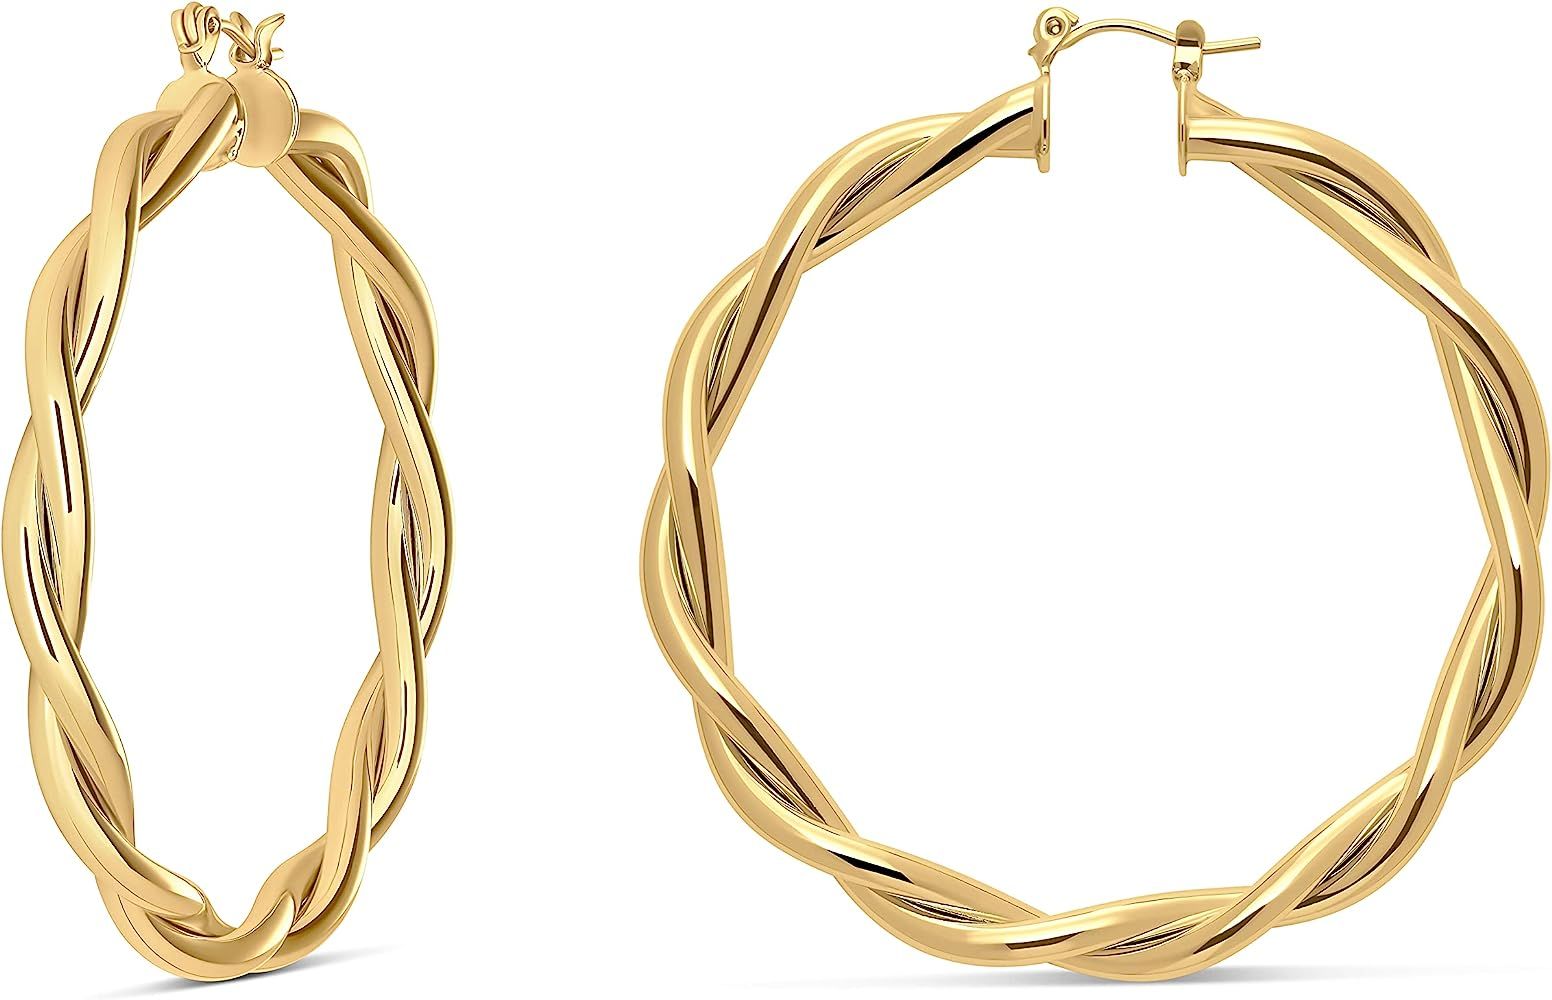 MILLA Twisted Hoop Earrings - 14k Gold Plated Earrings for Women or Chunky Silver Hoops - Gold State | Amazon (US)